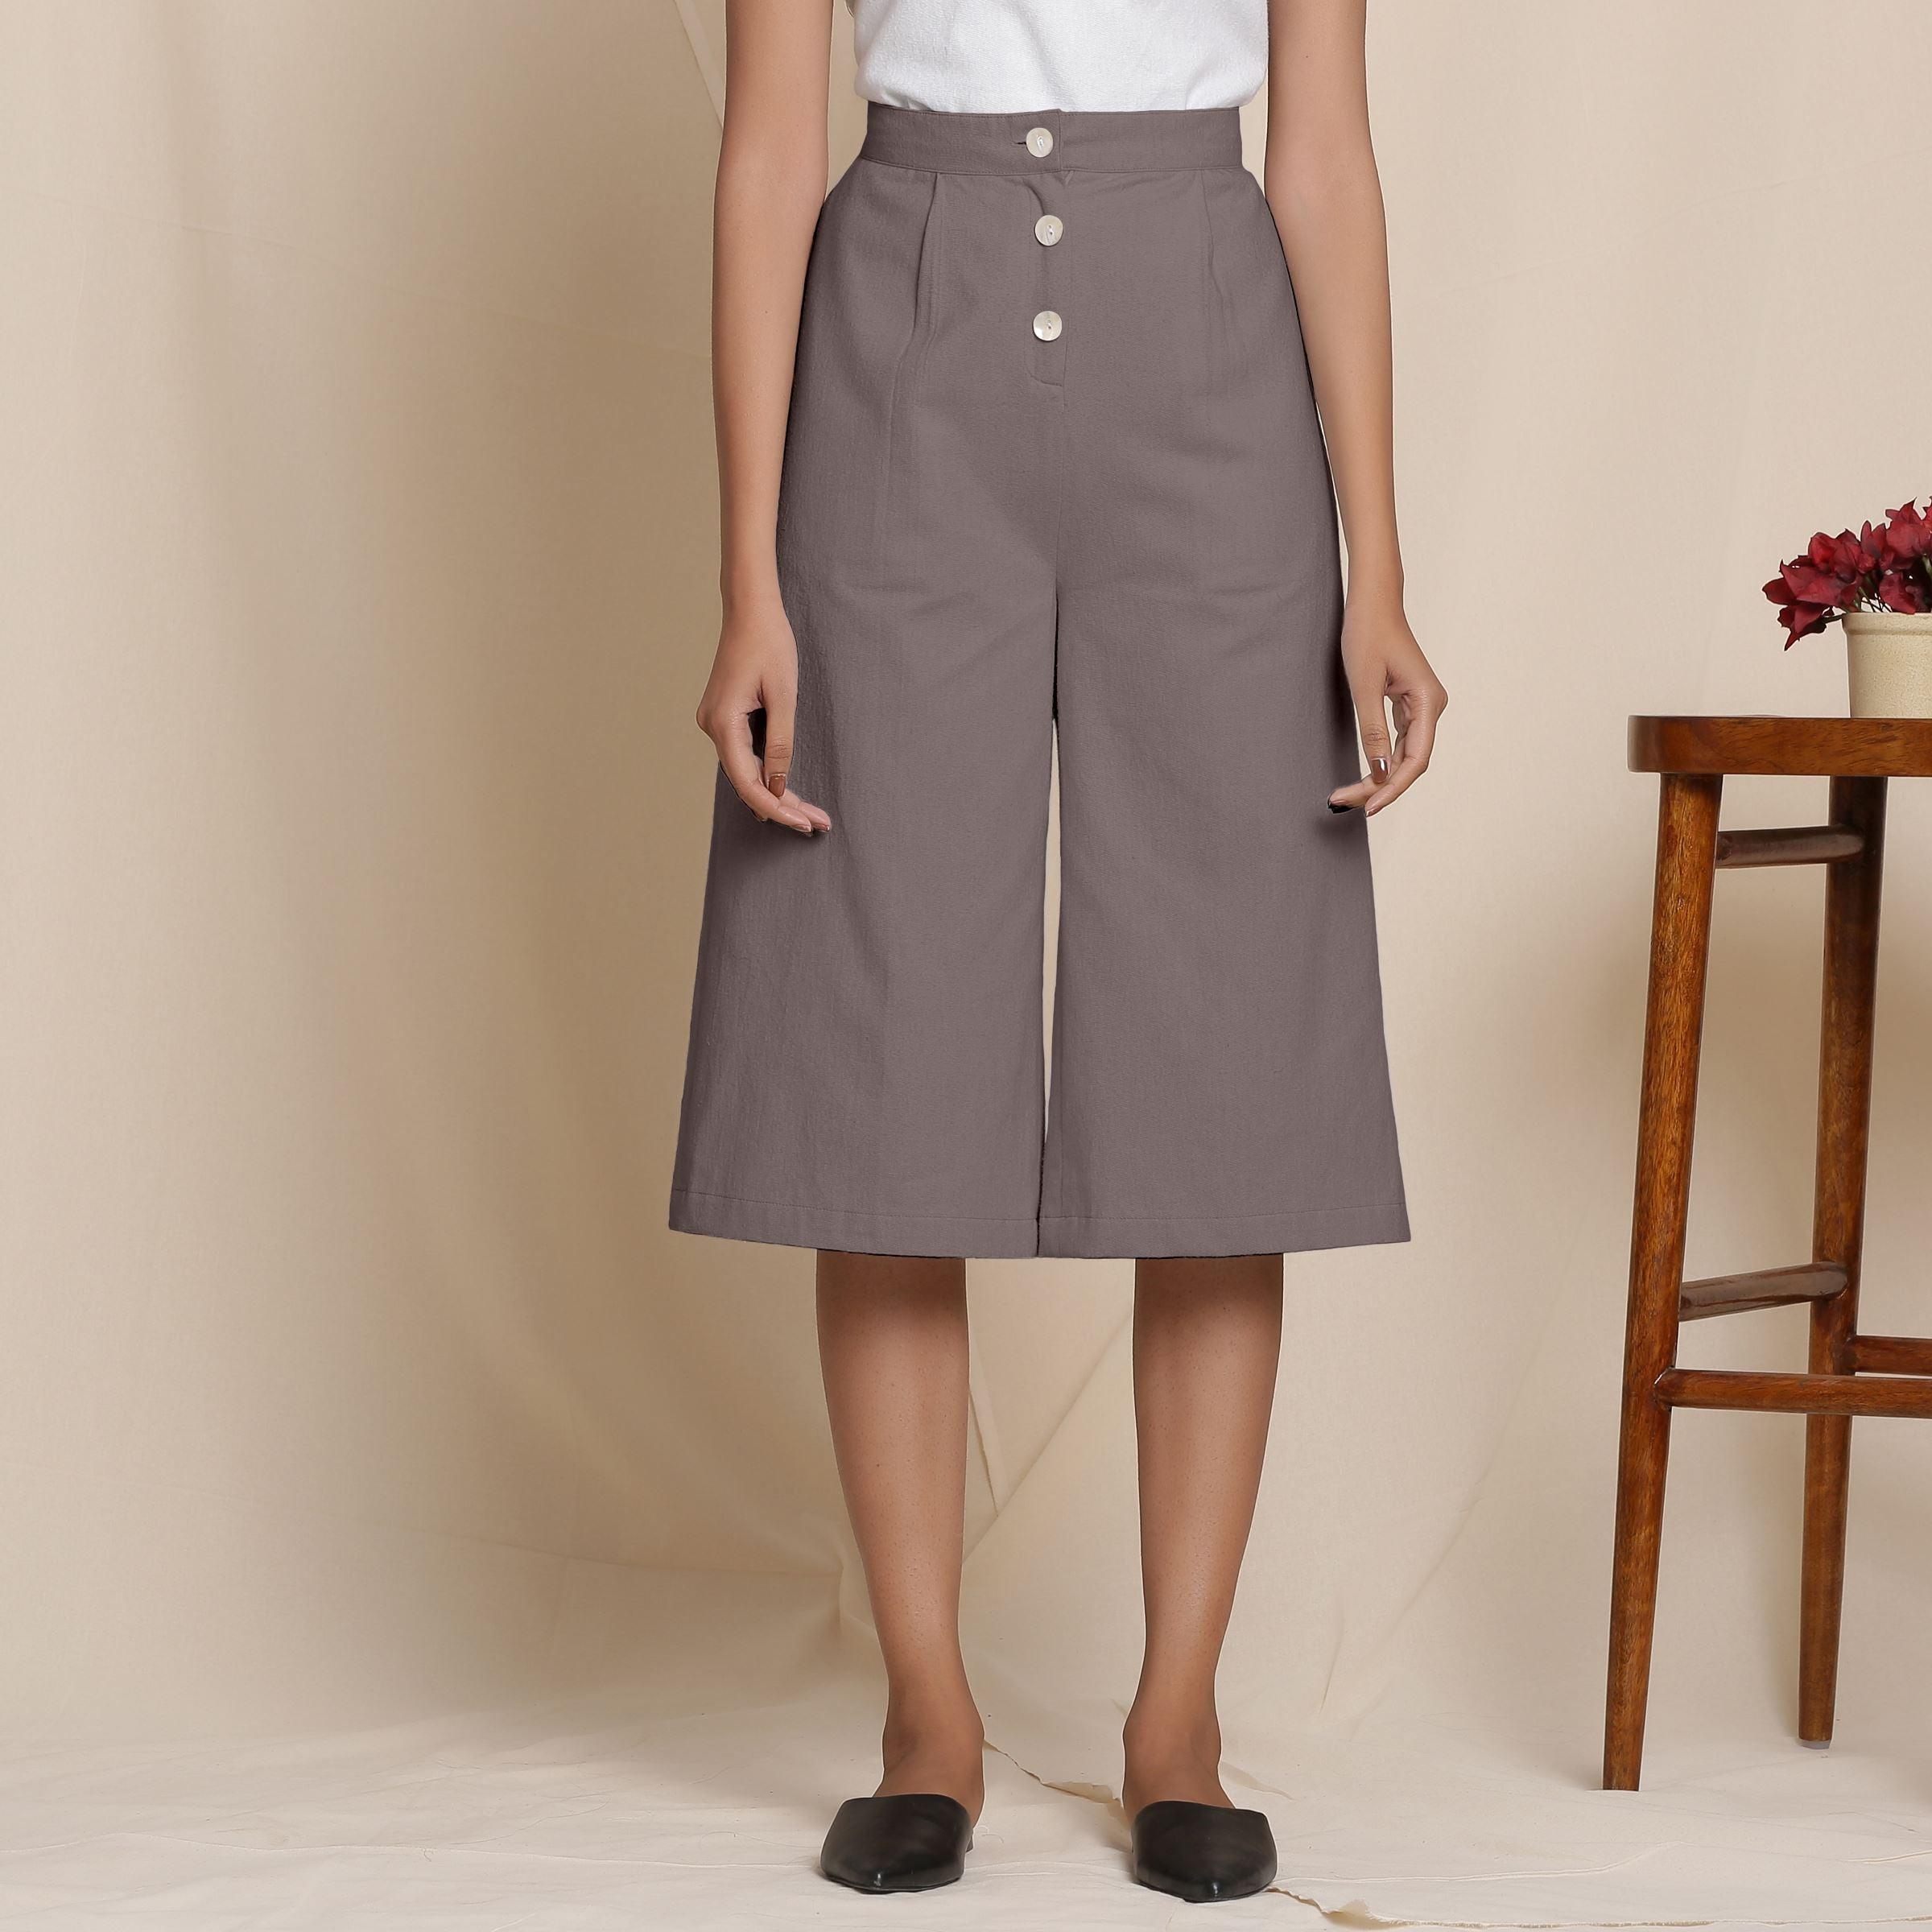 Culottes Versus Gaucho Pants—What's the Difference?